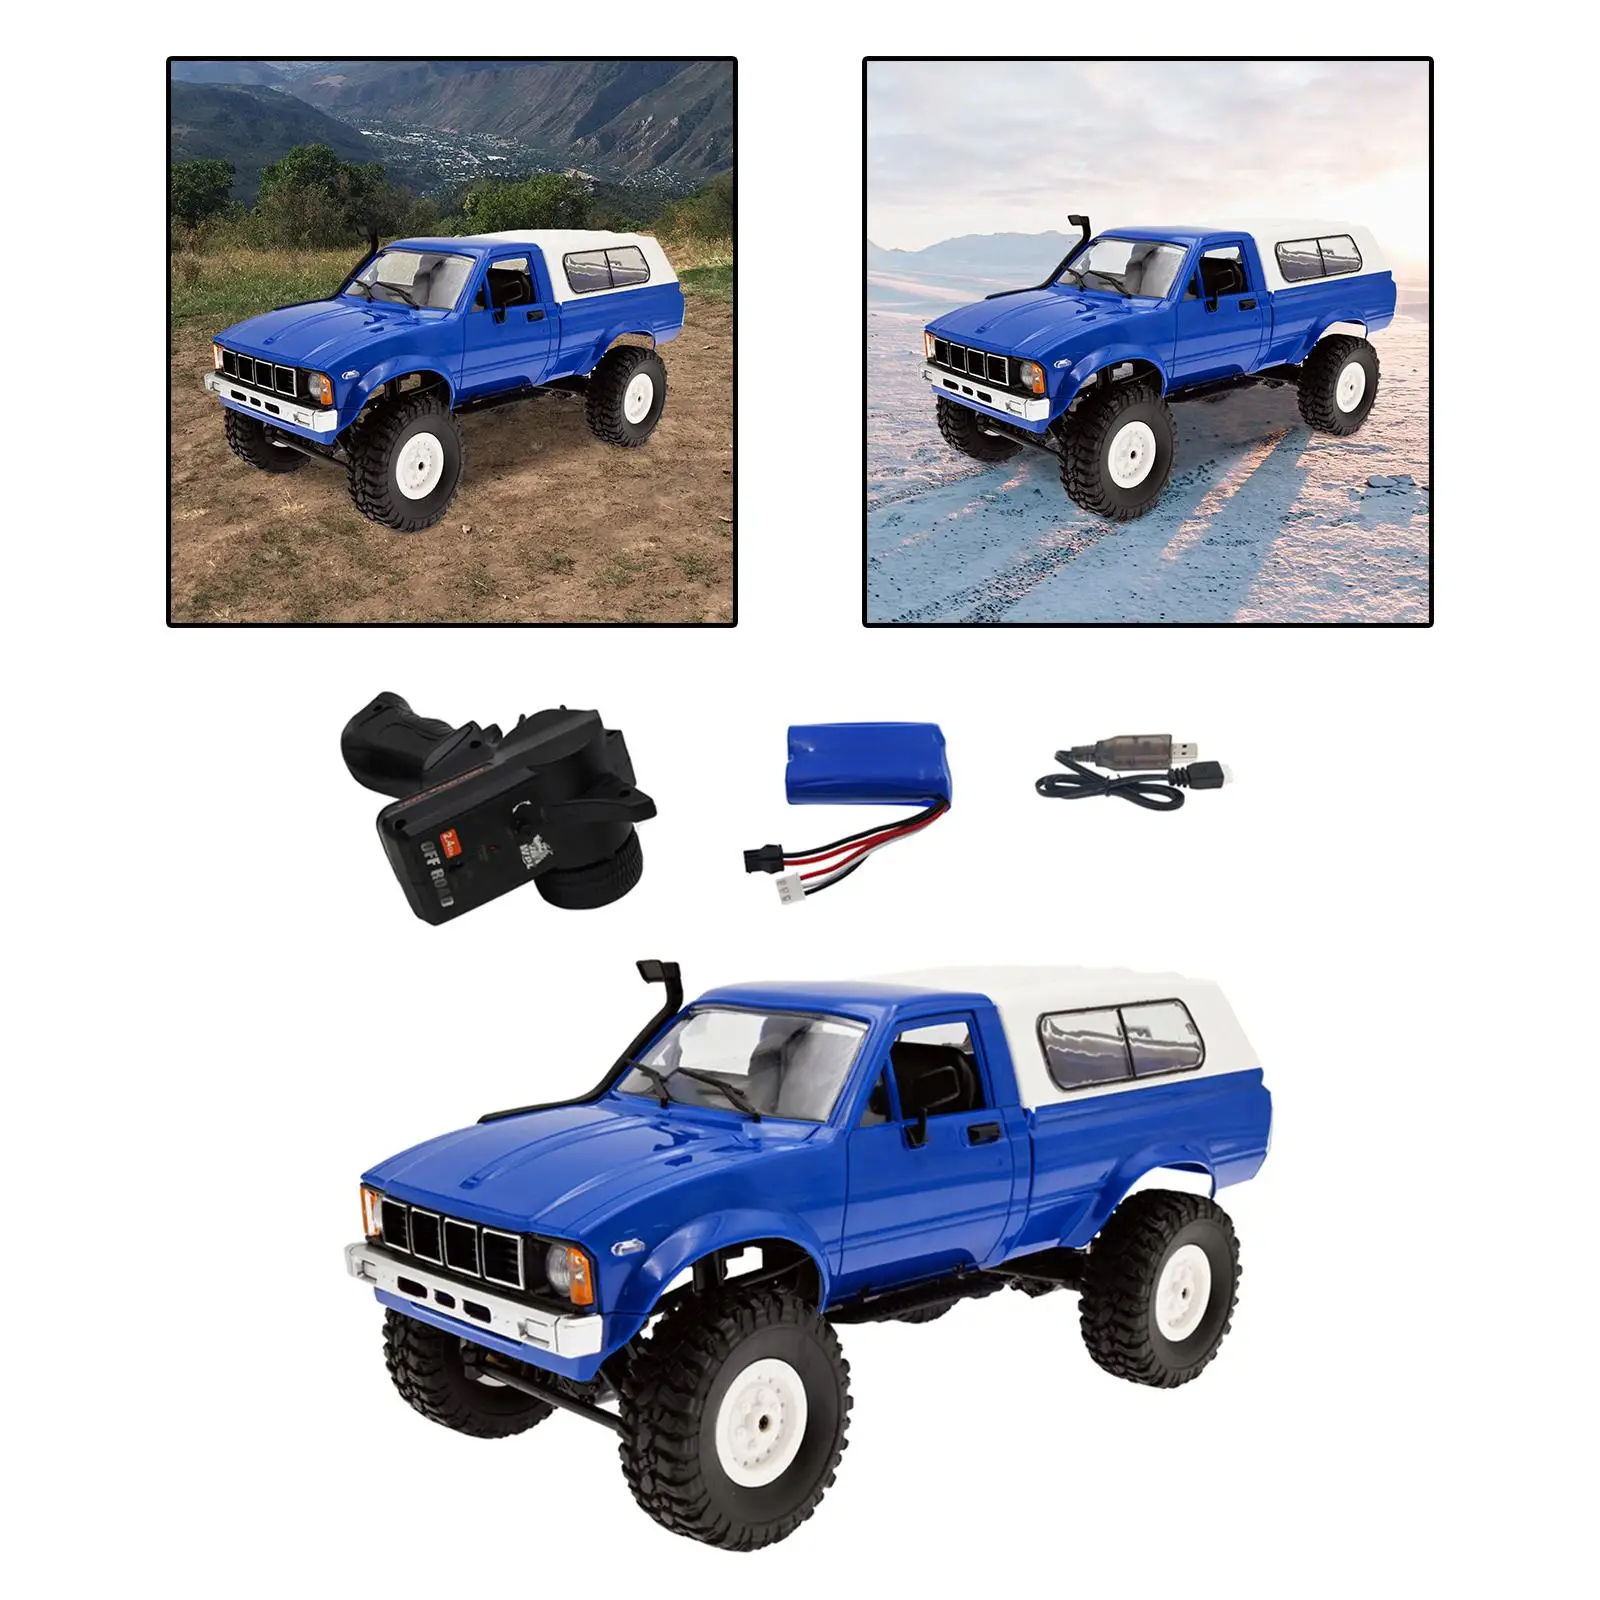 1:16 Scale RC Car15km/H 2.4G Forward for Adults Kids Holiday Gifts